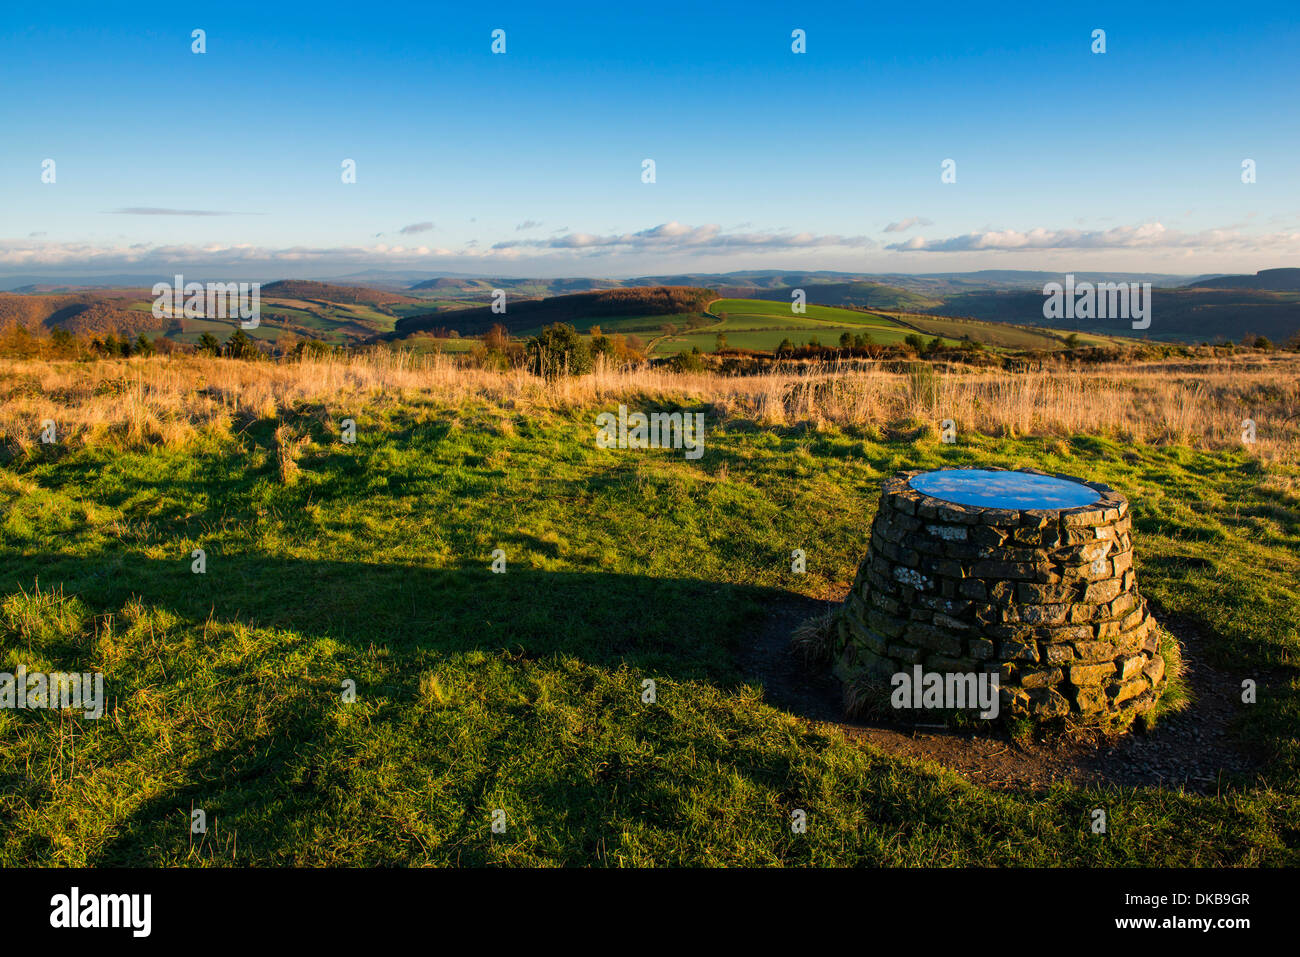 Toposcope on top of Bury Ditches iron age hill fort, Shropshire, England Stock Photo